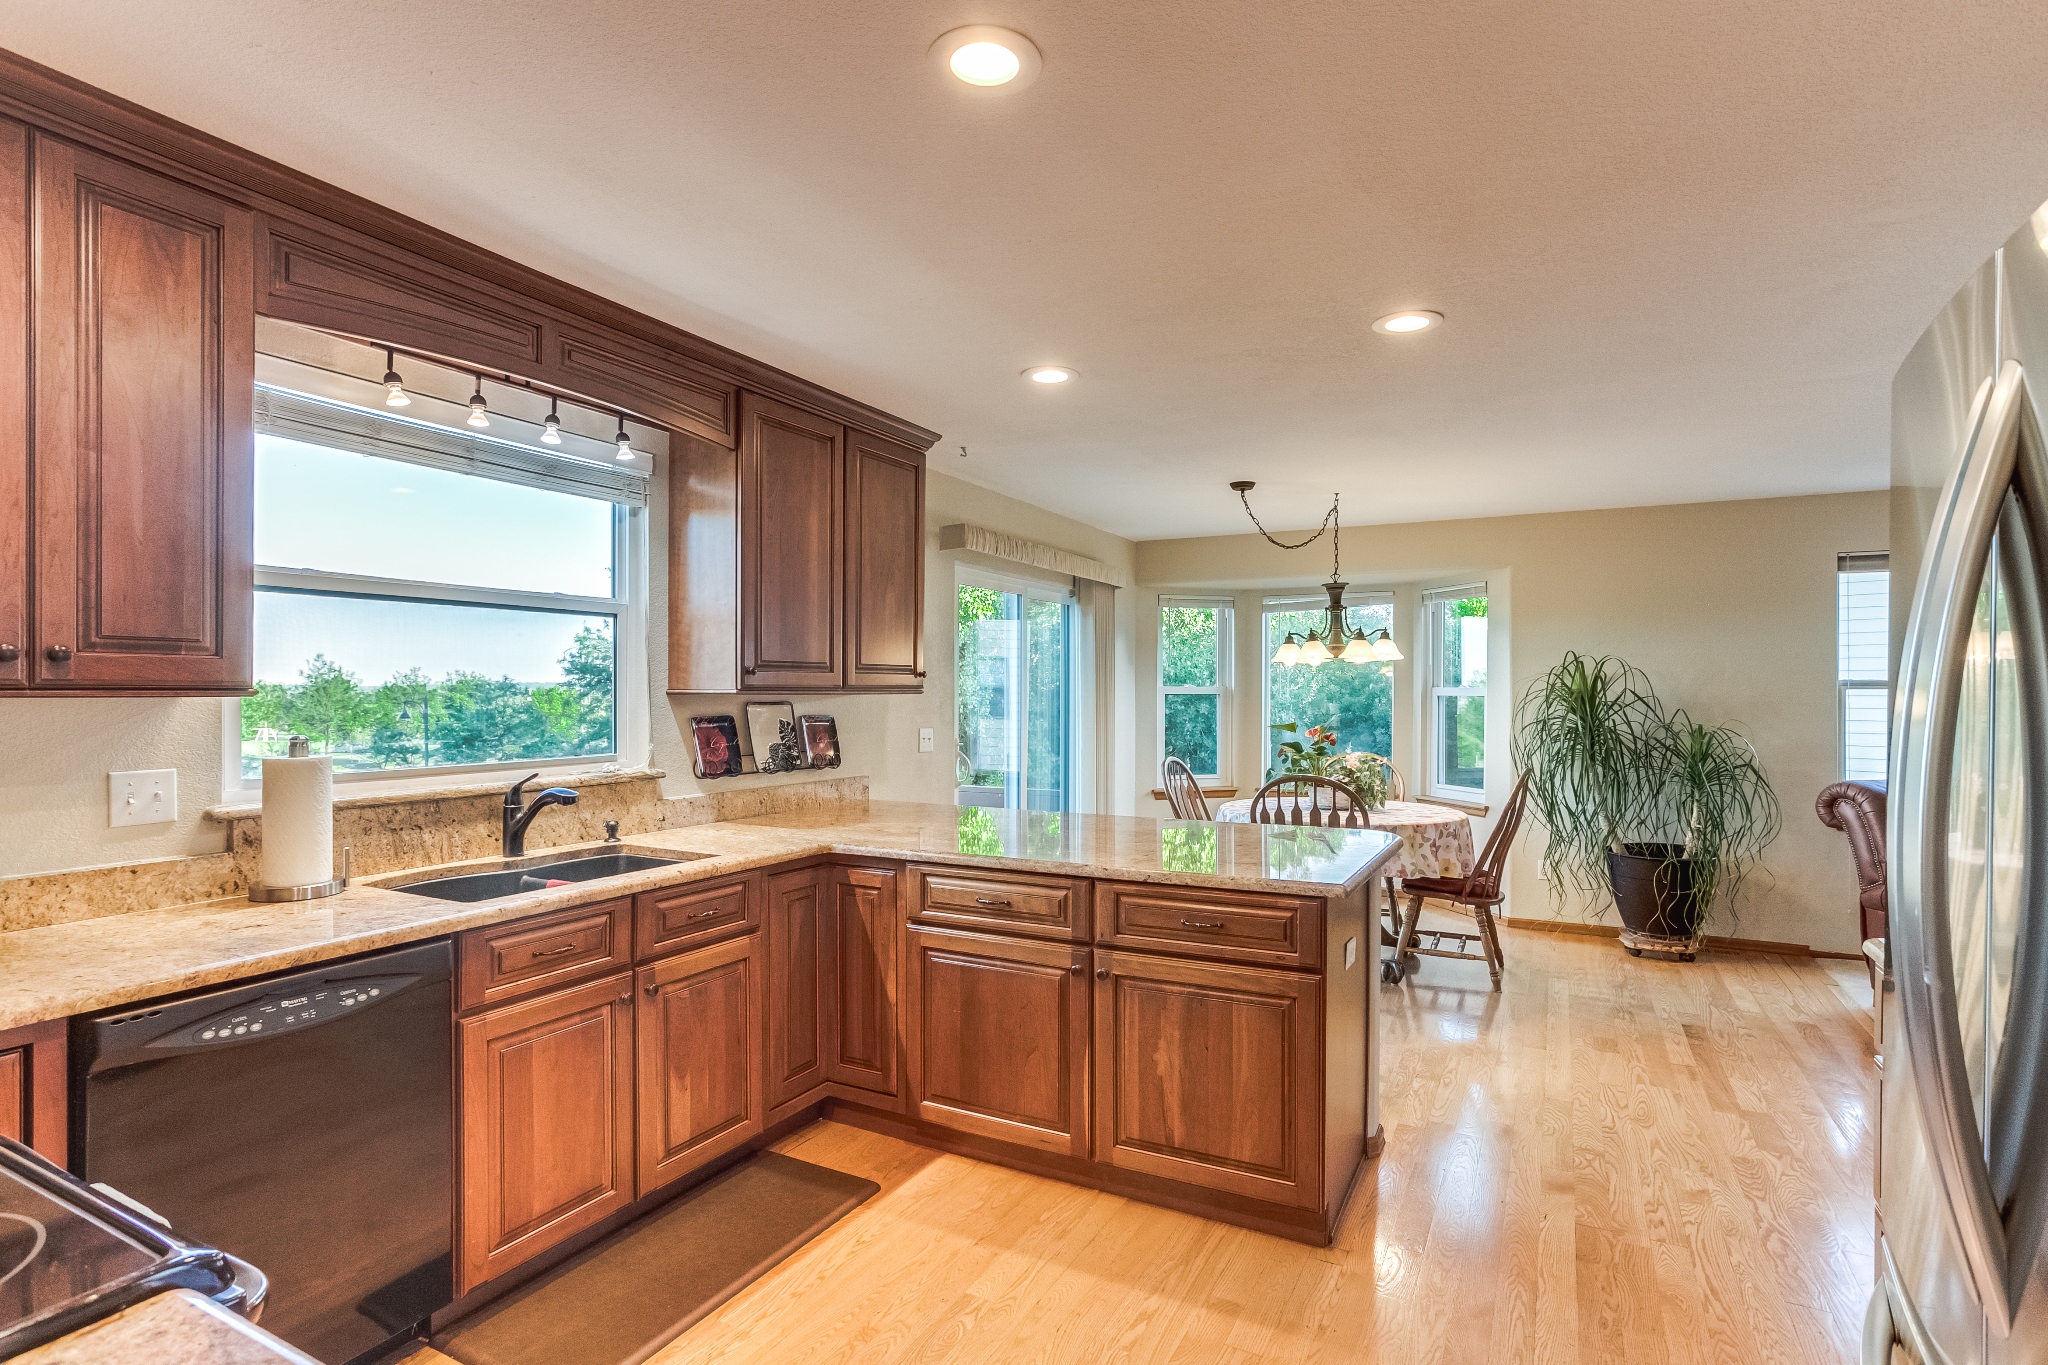 REAL ESTATE LISTING: 1280 Elmwood Ct Broomfield Kitchen Nook and Family Room